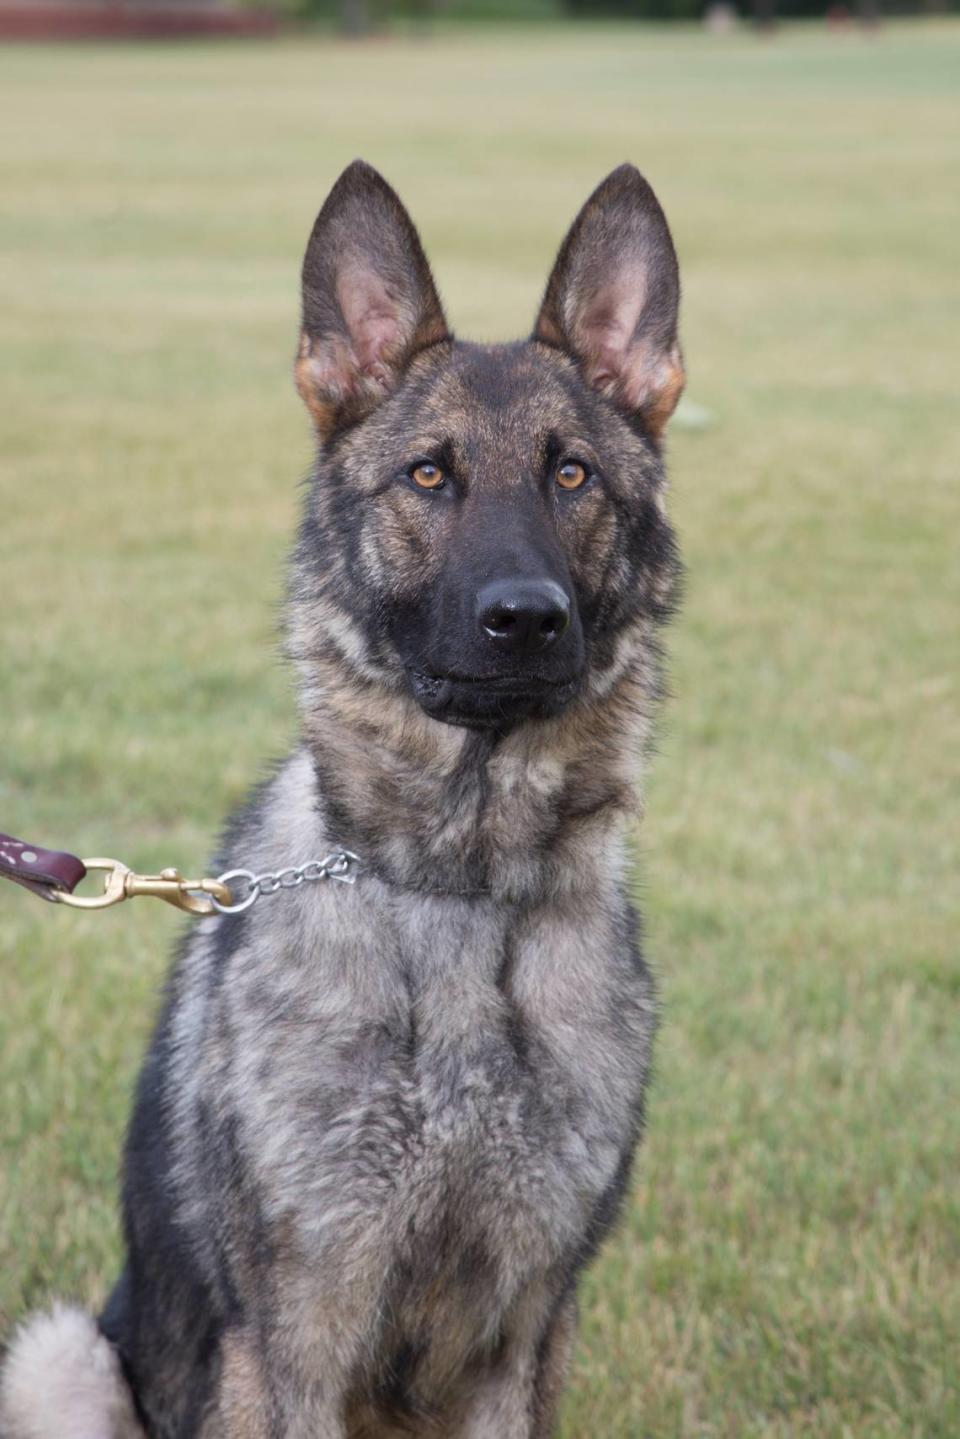 A police dog named Loki helped track down the hunter, who was “very cold,” authorities said.